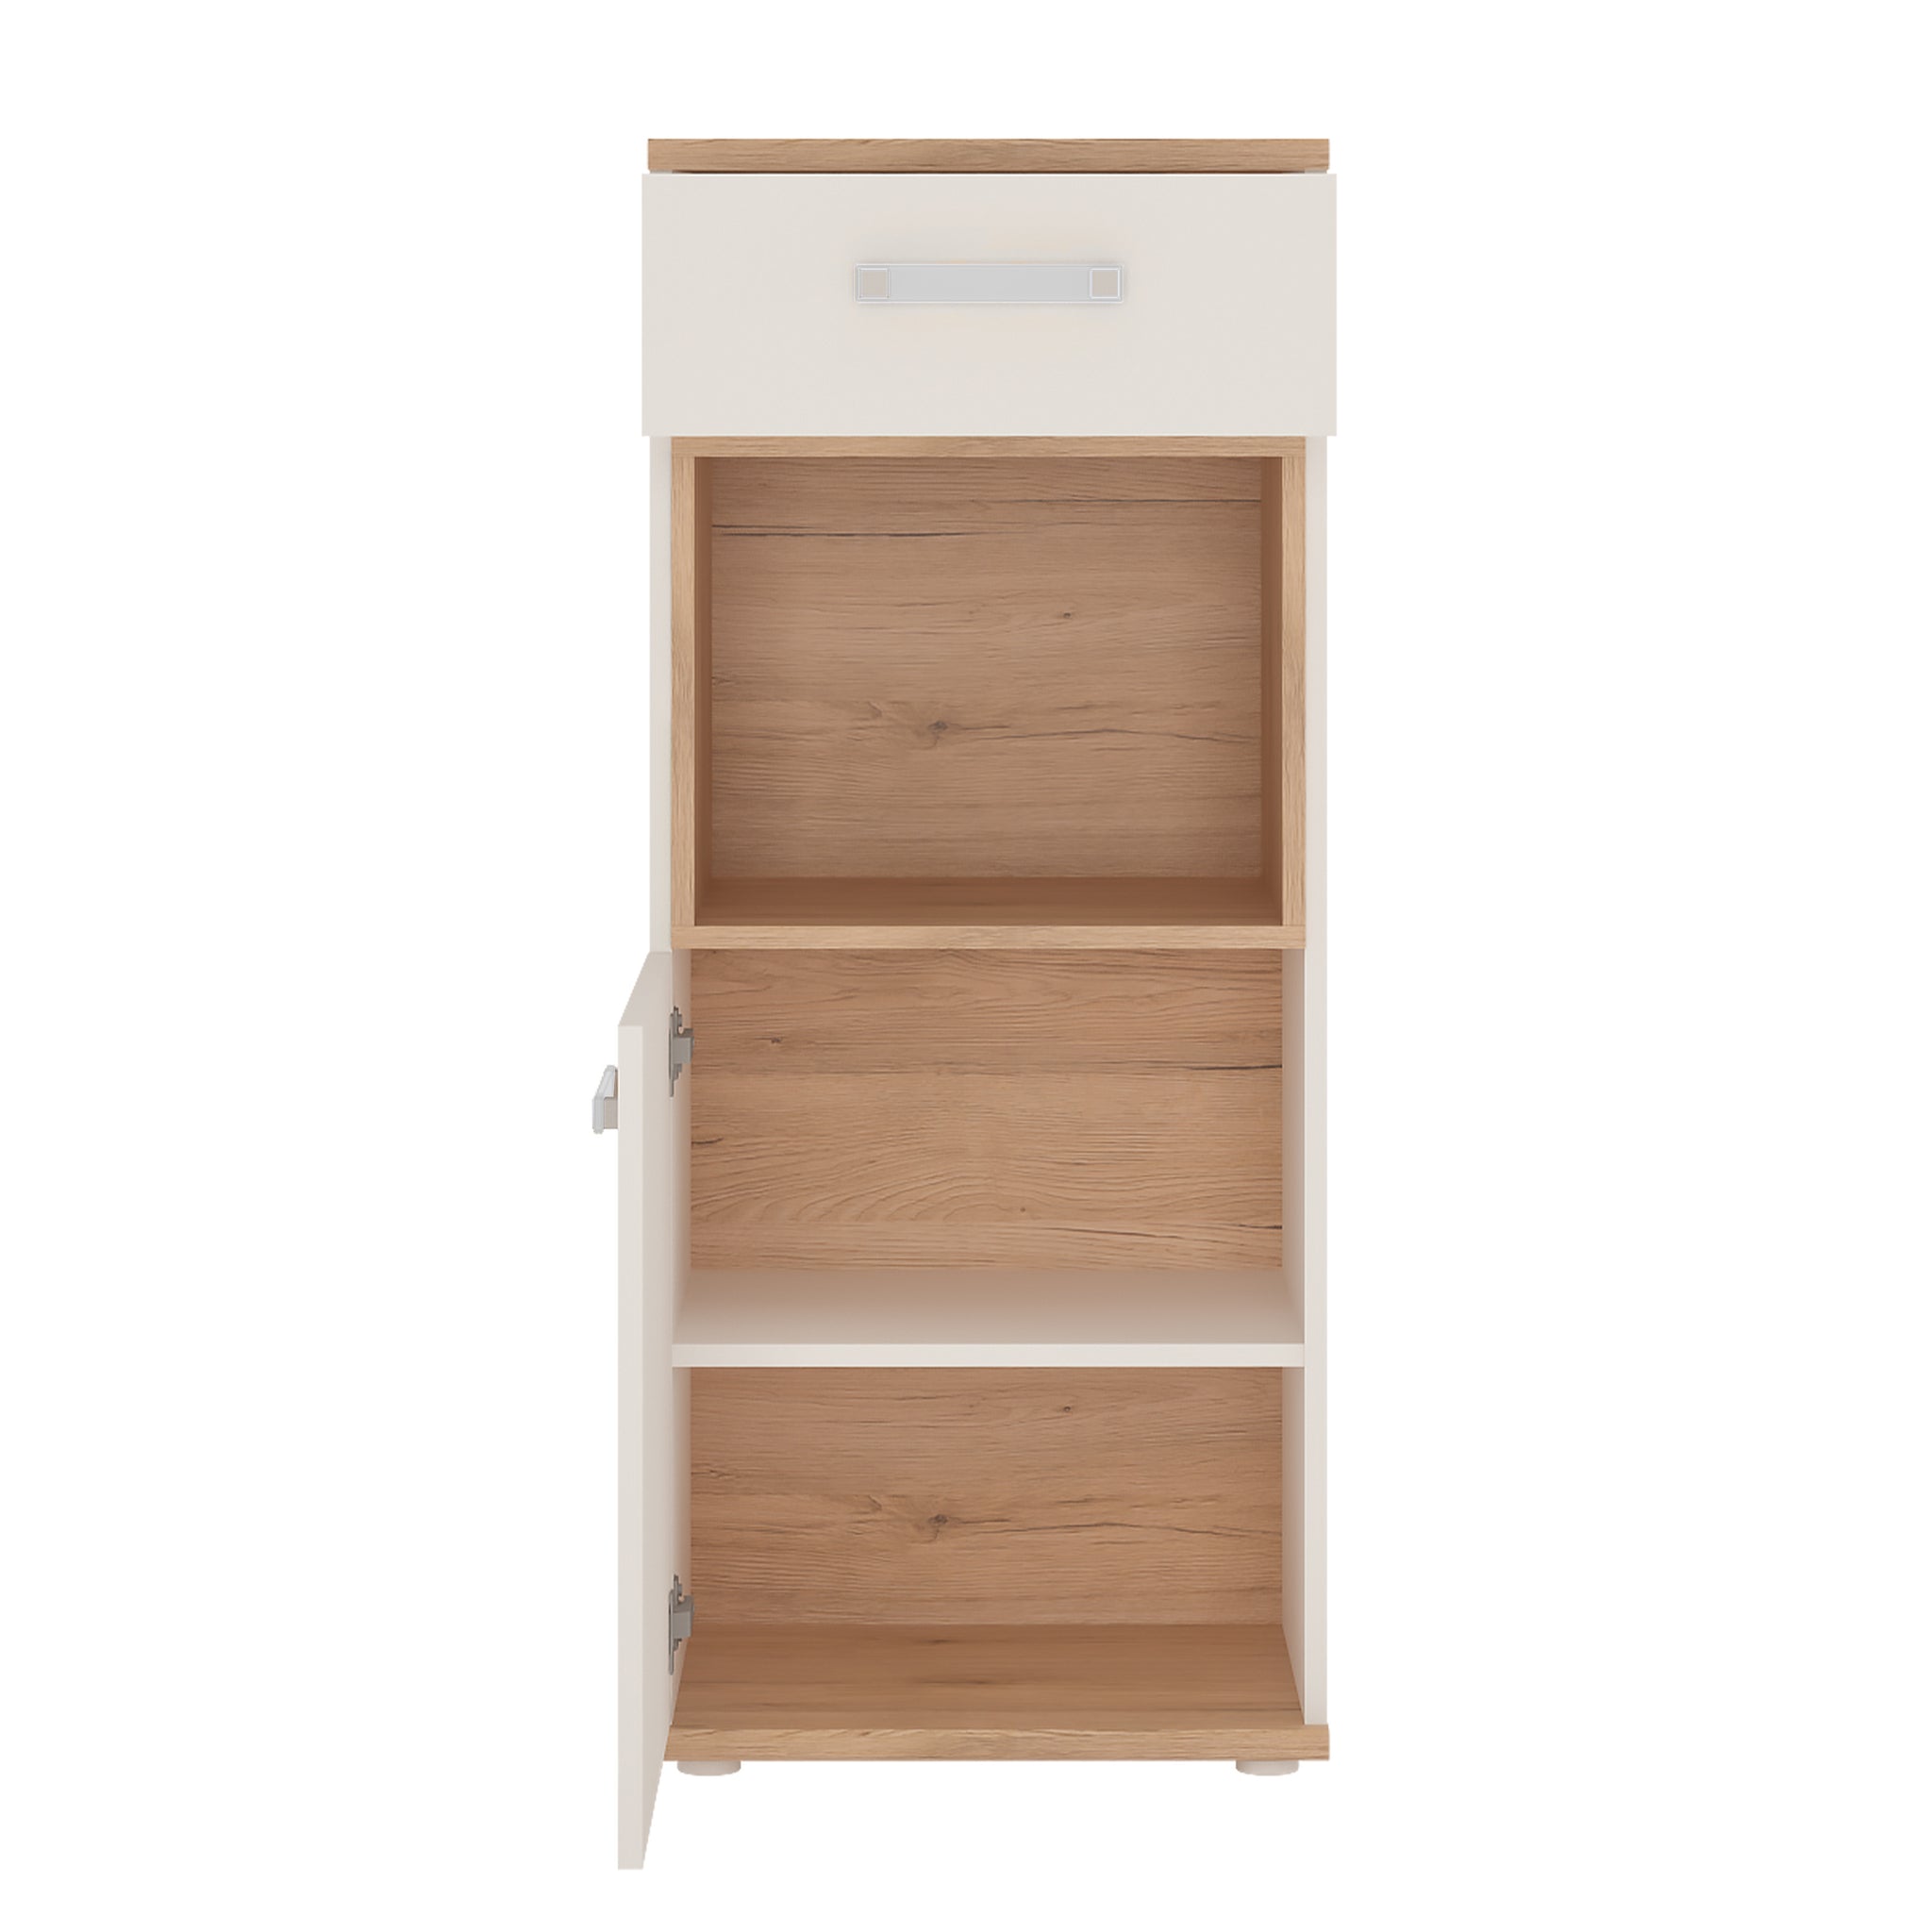 To Play 1 Door 1 Drawer Narrow Cabinet in Light Oak and white High Gloss